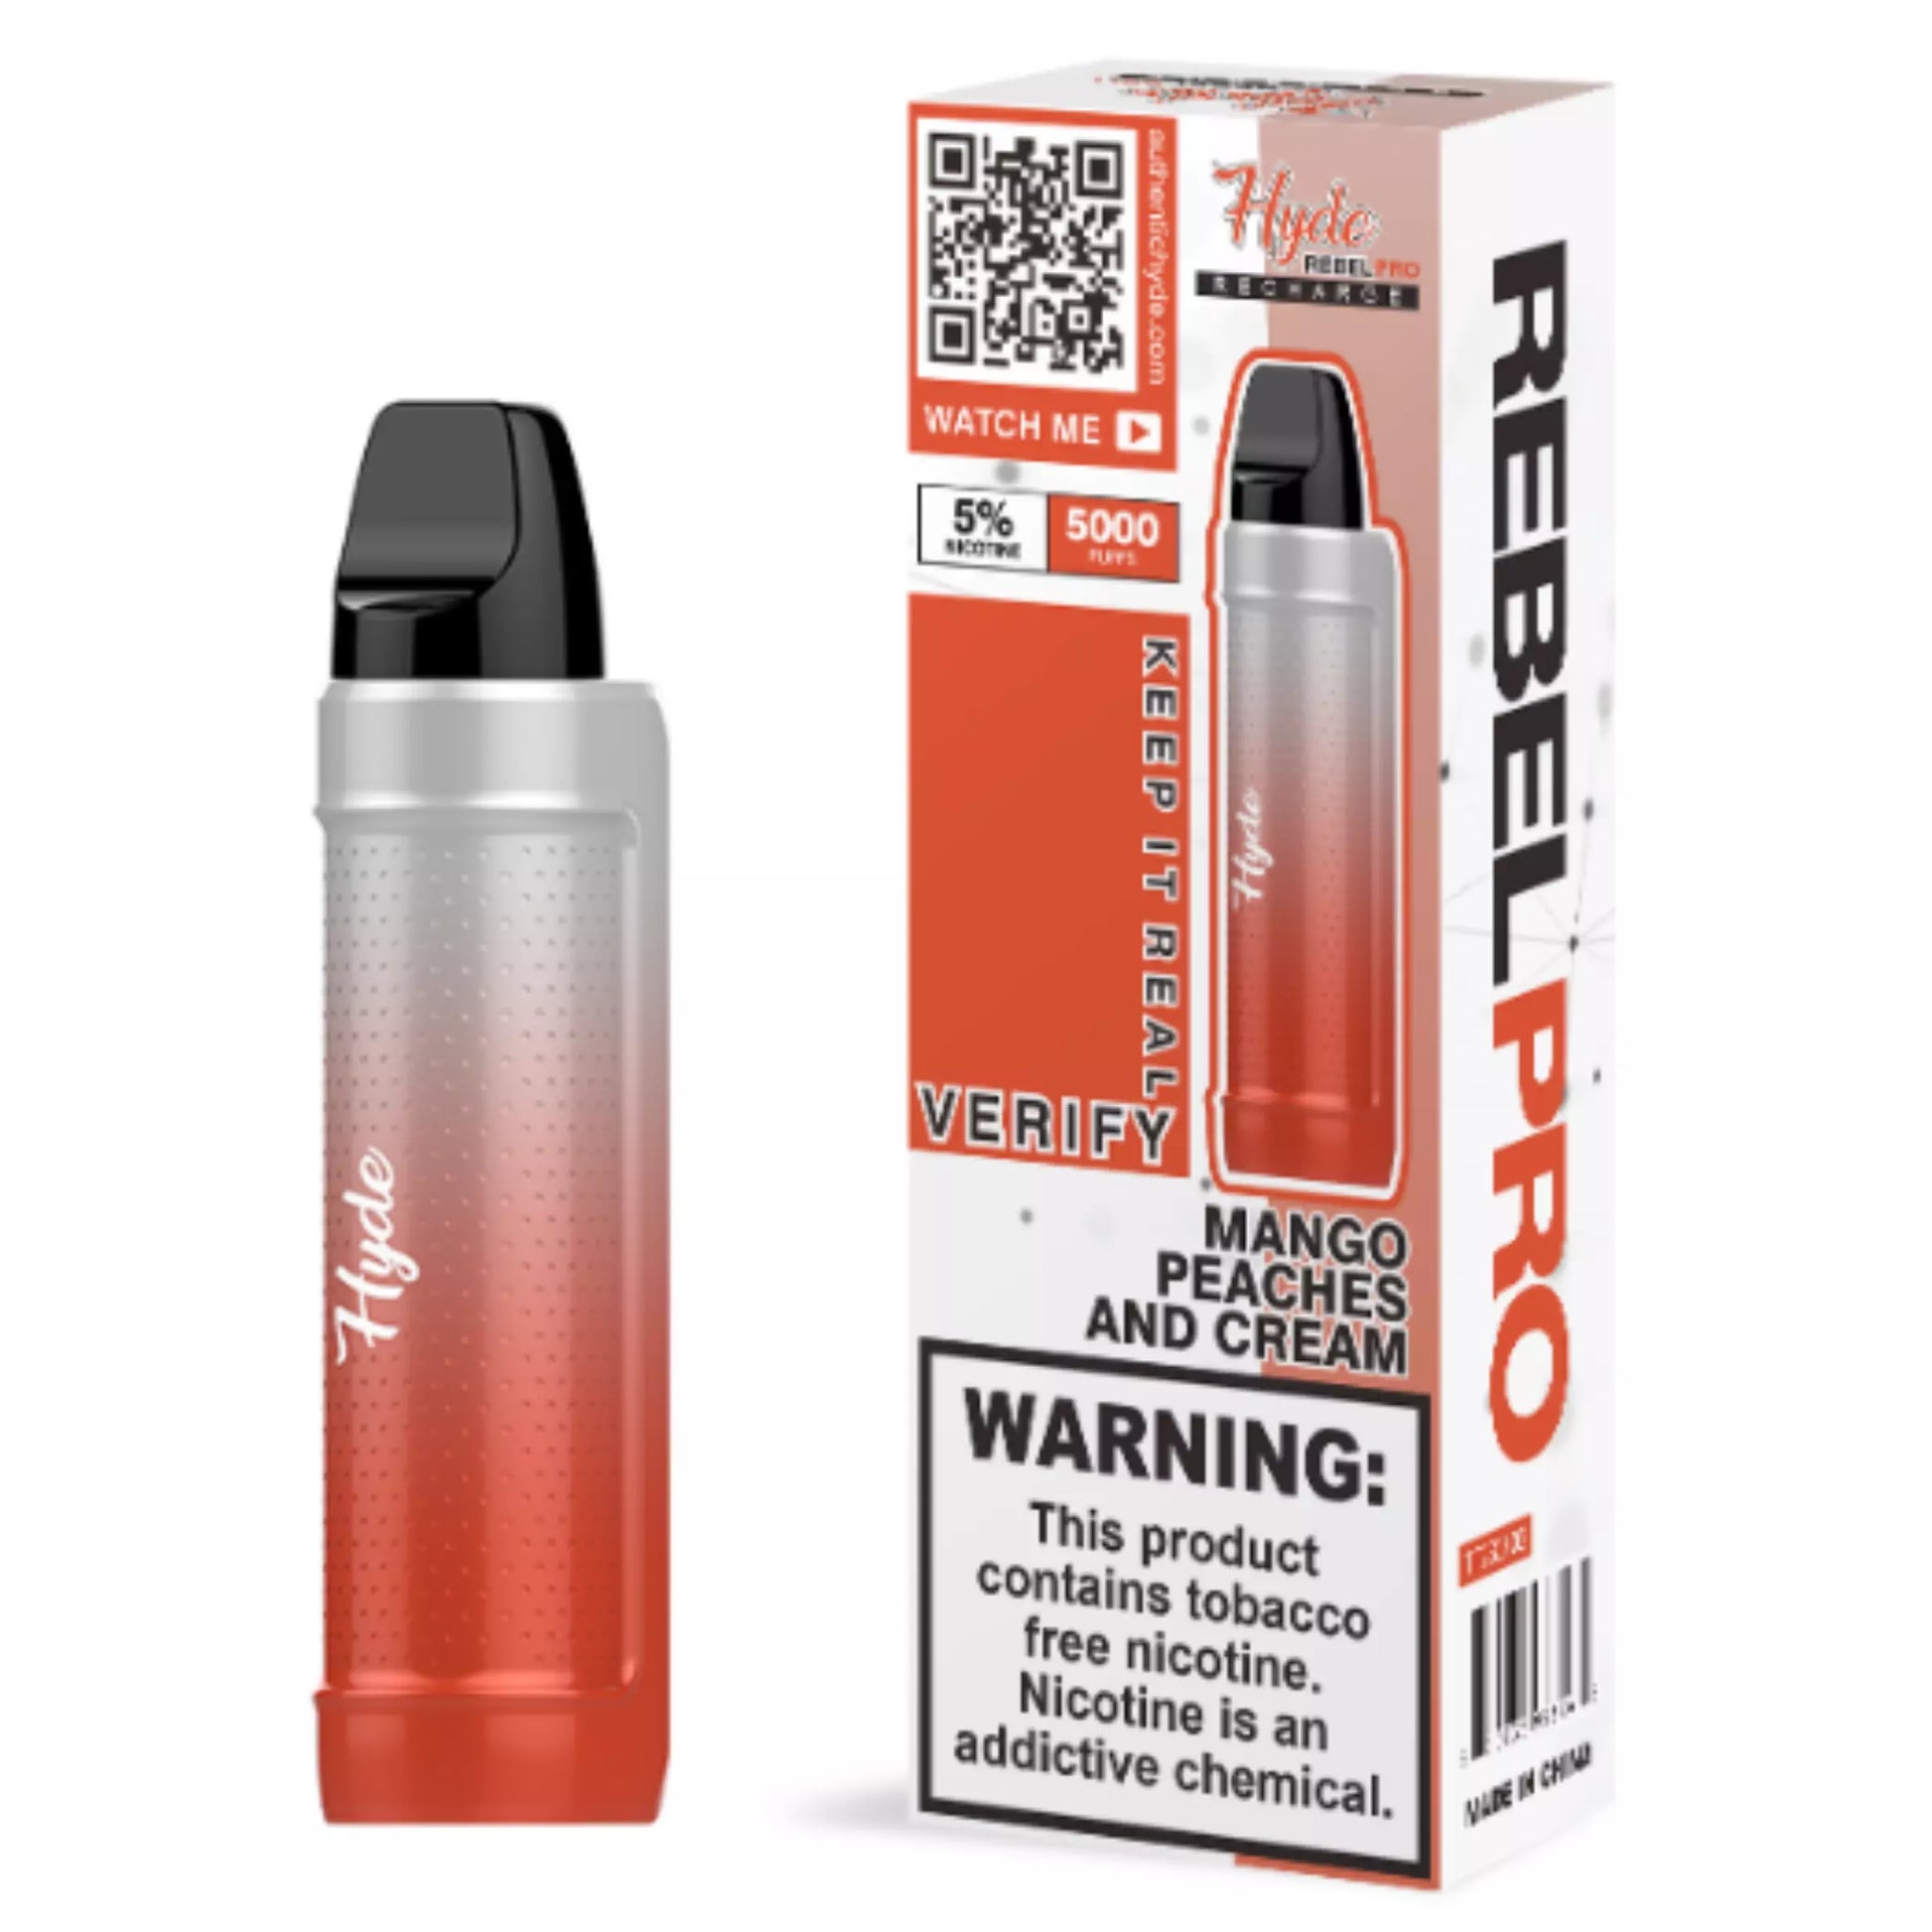 Hyde Rebel Pro Disposable Rechargeable 5000 Puffs - Mango Peaches and Cream